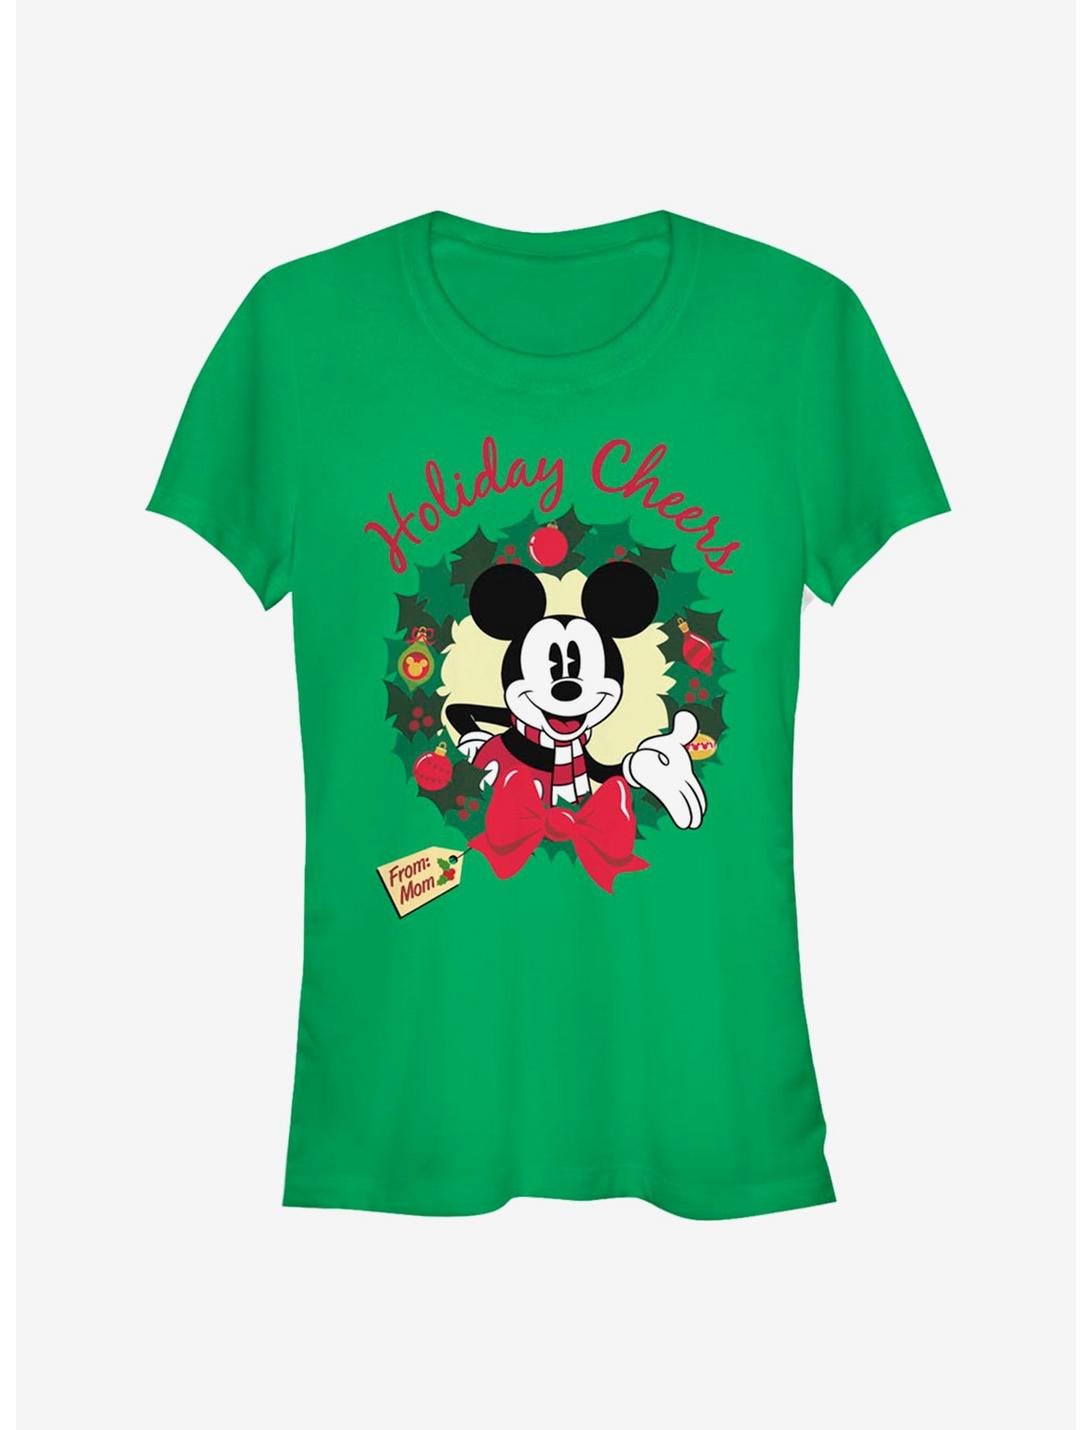 Disney Mickey Mouse Holiday Cheers Wreath Classic Girls T-Shirt, KELLY, hi-res